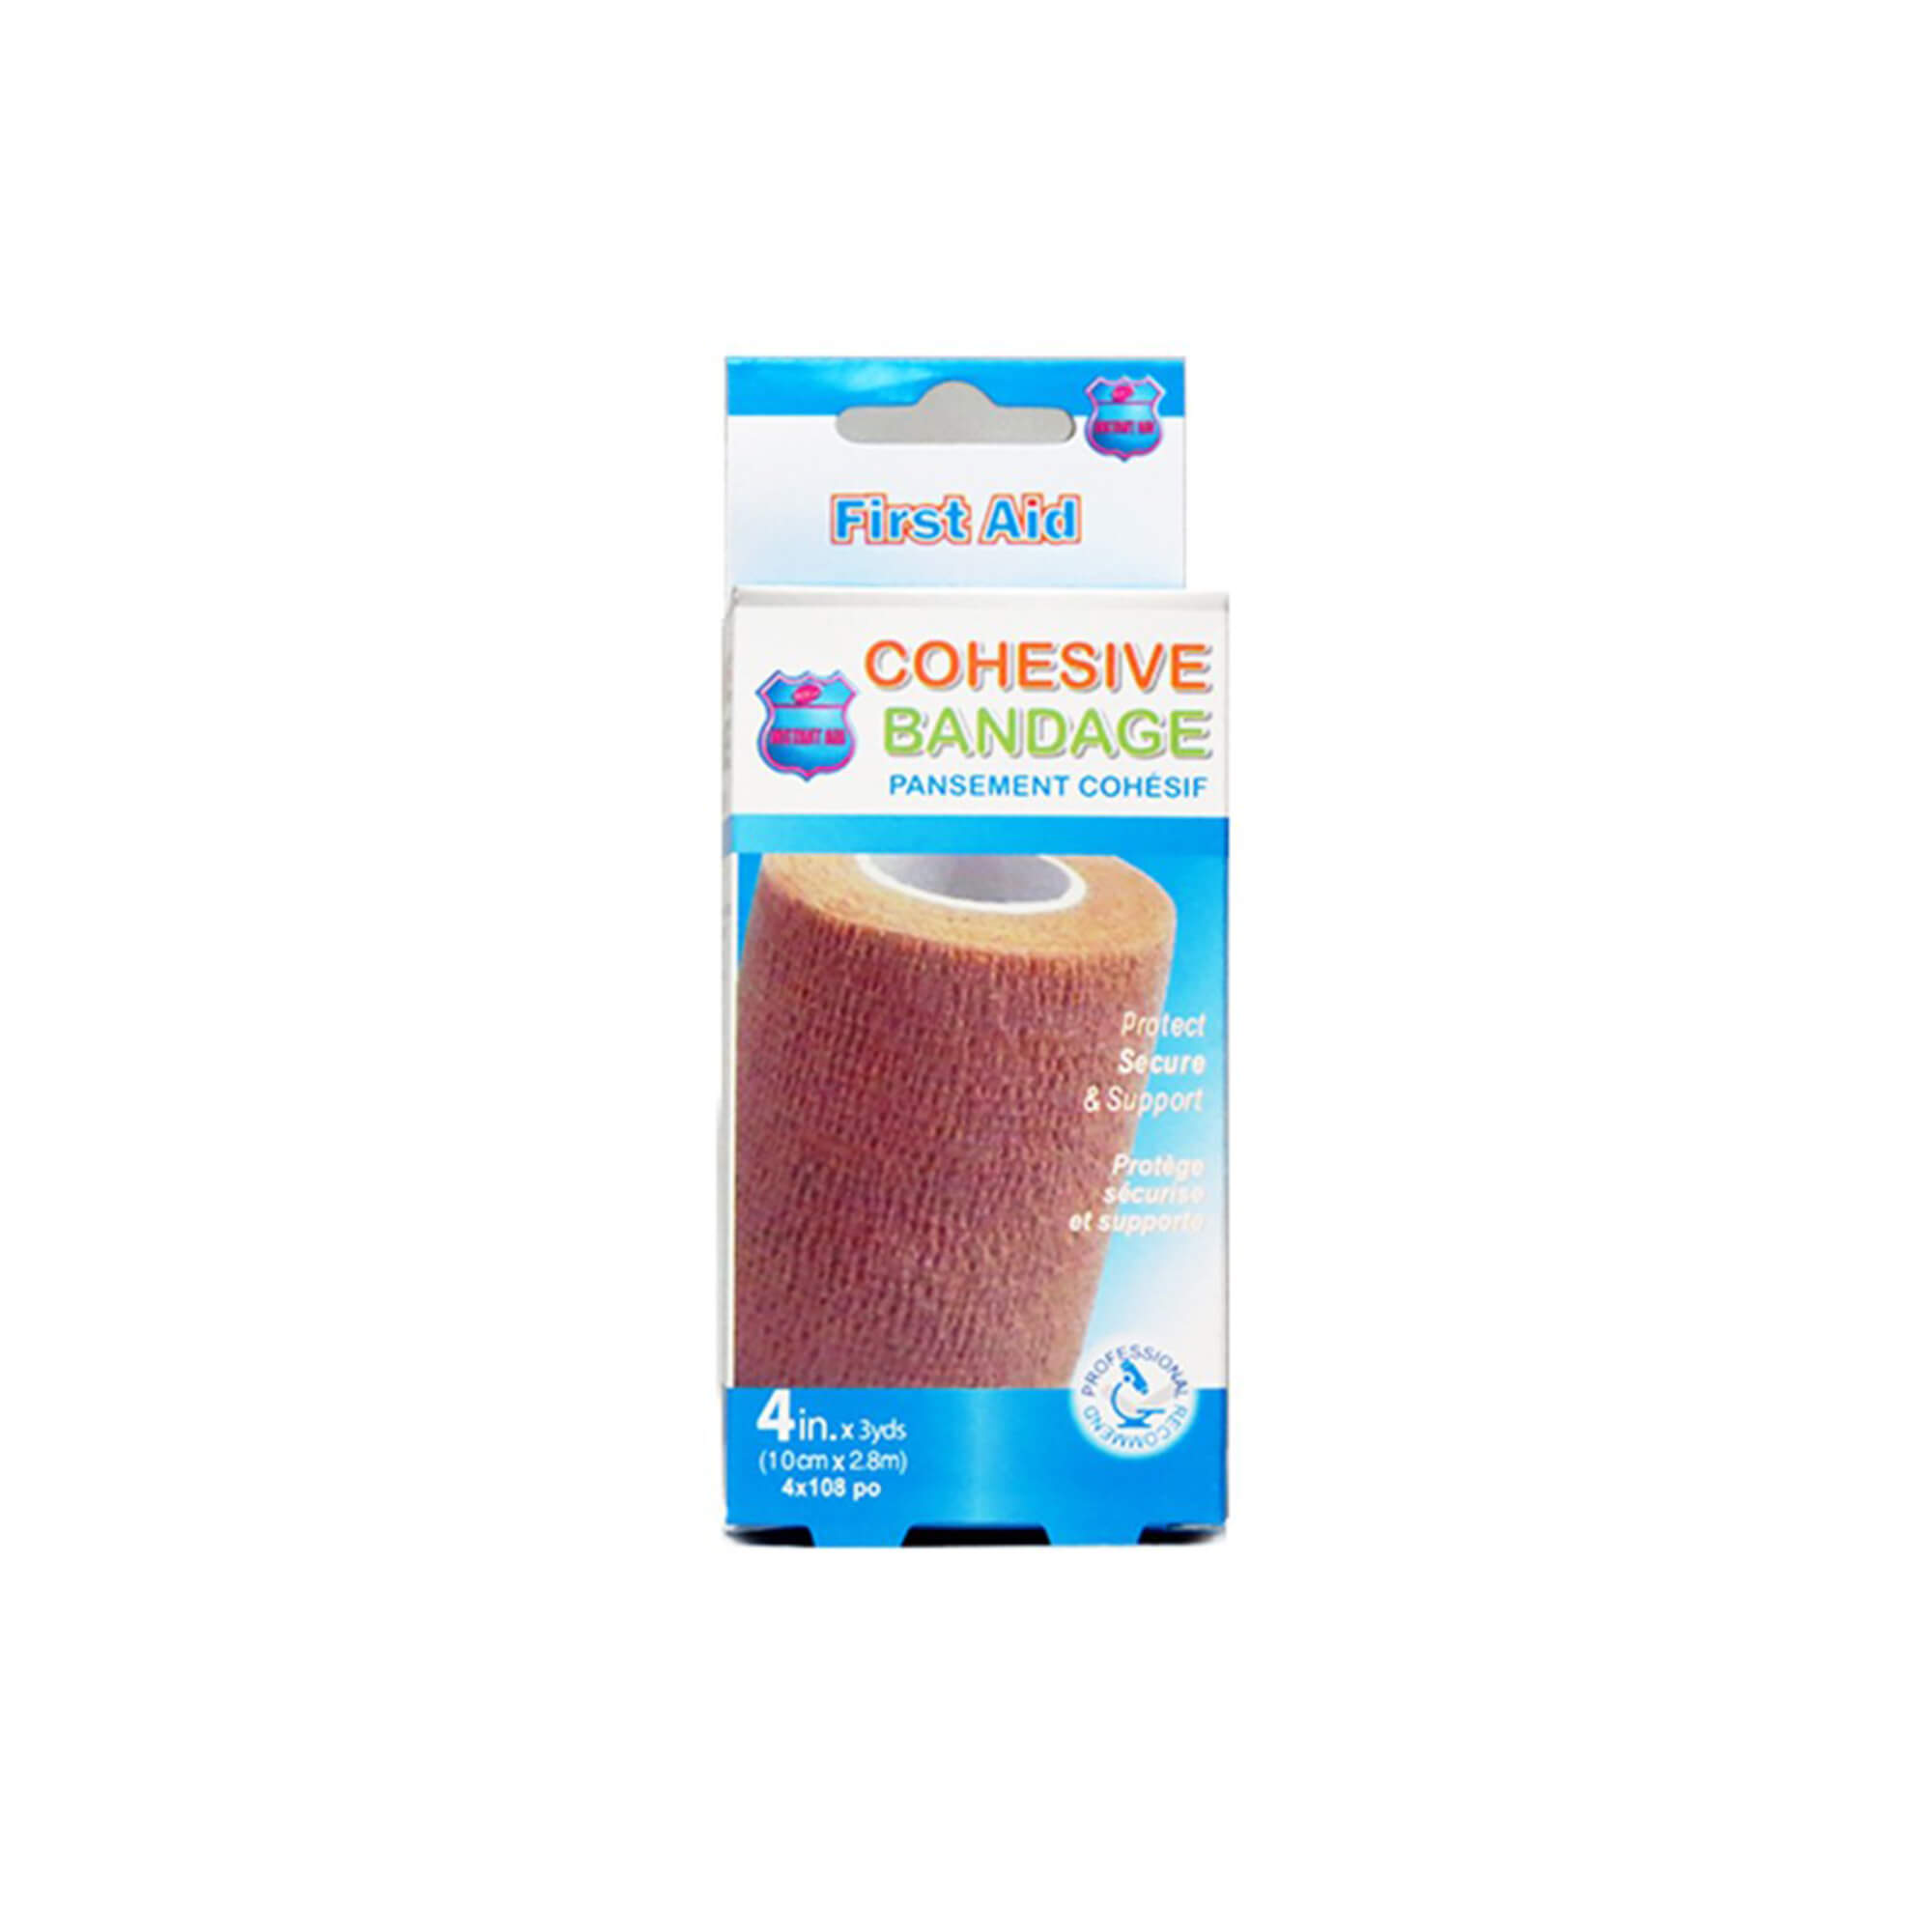 Purest Instant Aid- 4 Inch Cohesive Bandage - Pack of 3